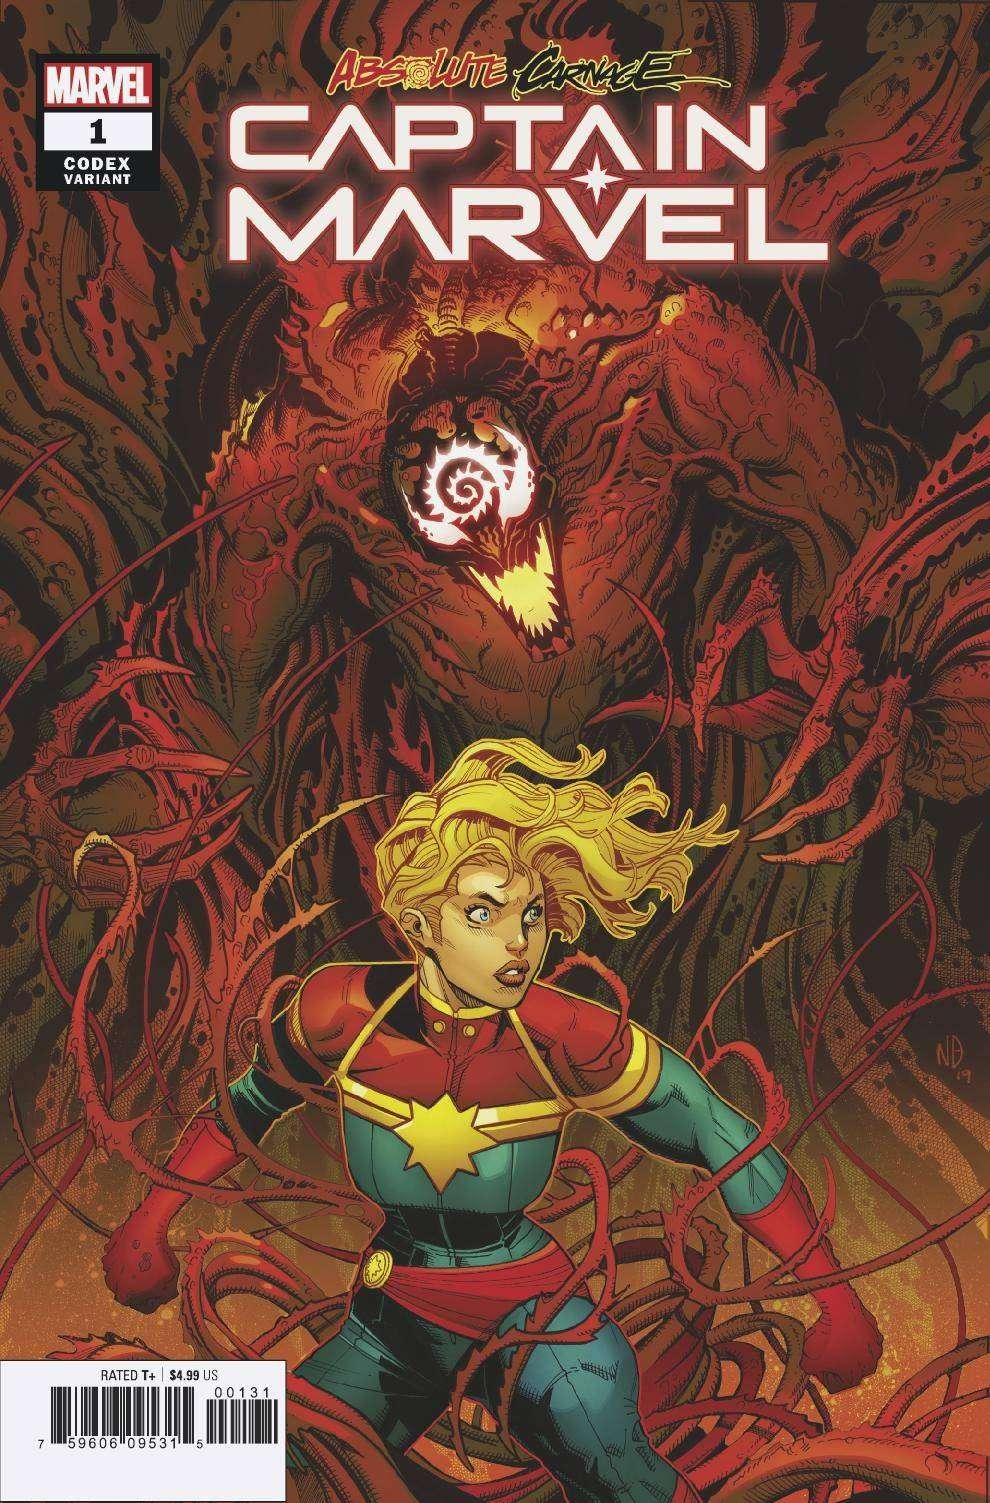 ABSOLUTE CARNAGE CAPTAIN MARVEL #1 CODEX VARIANT AC